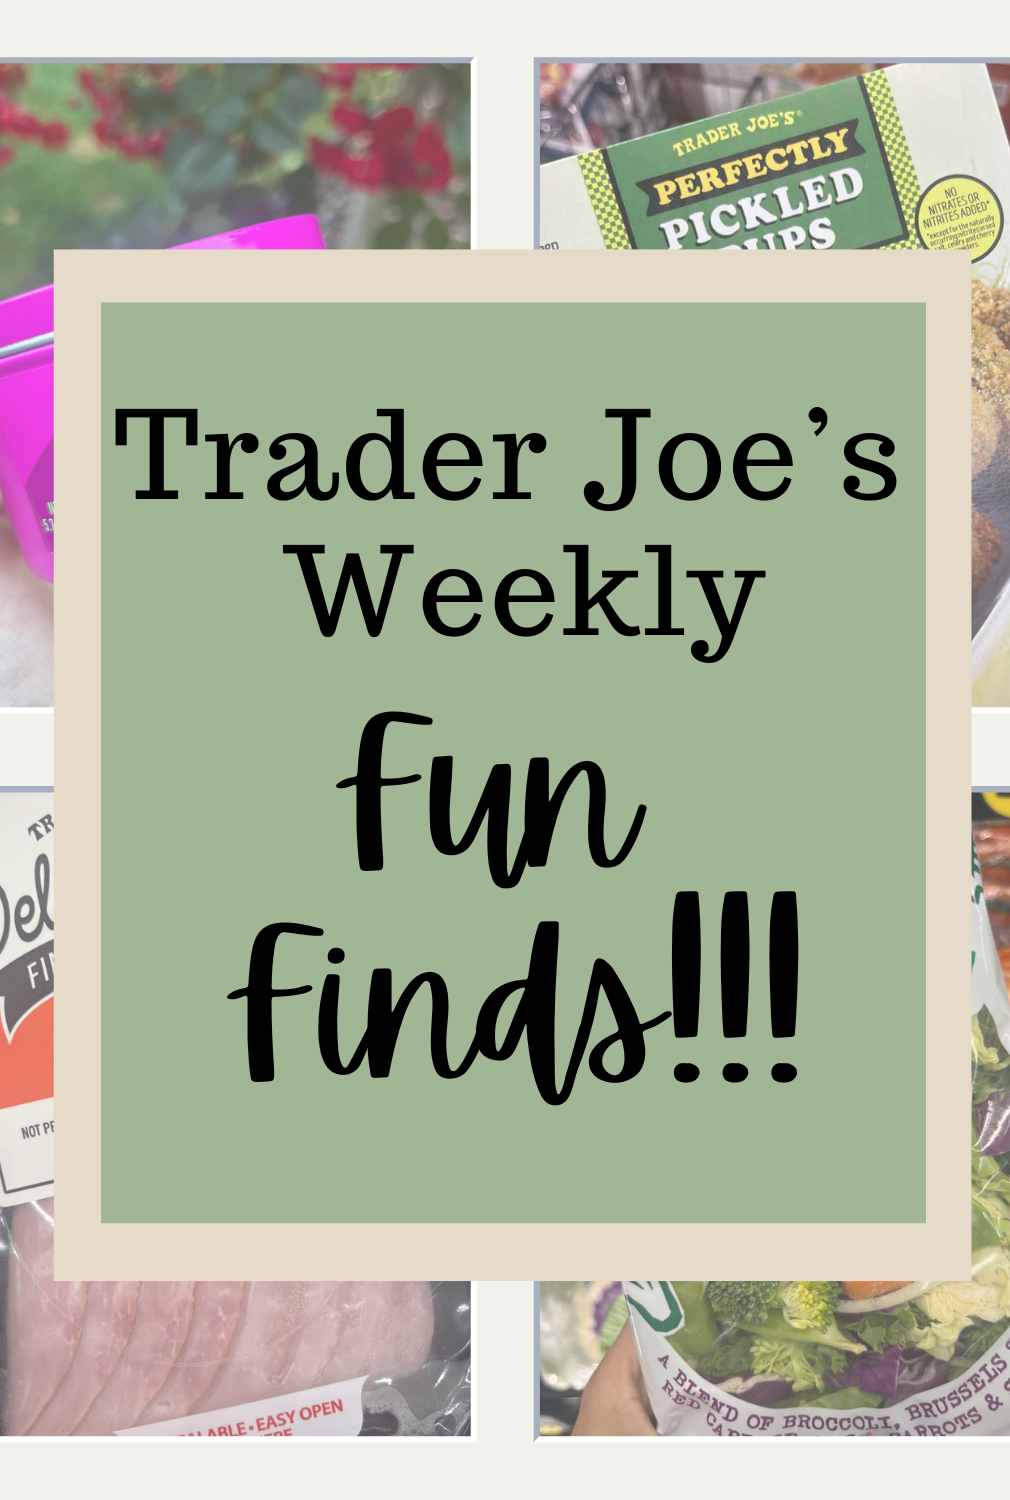 Image collage for Trader Joe's weekly finds.